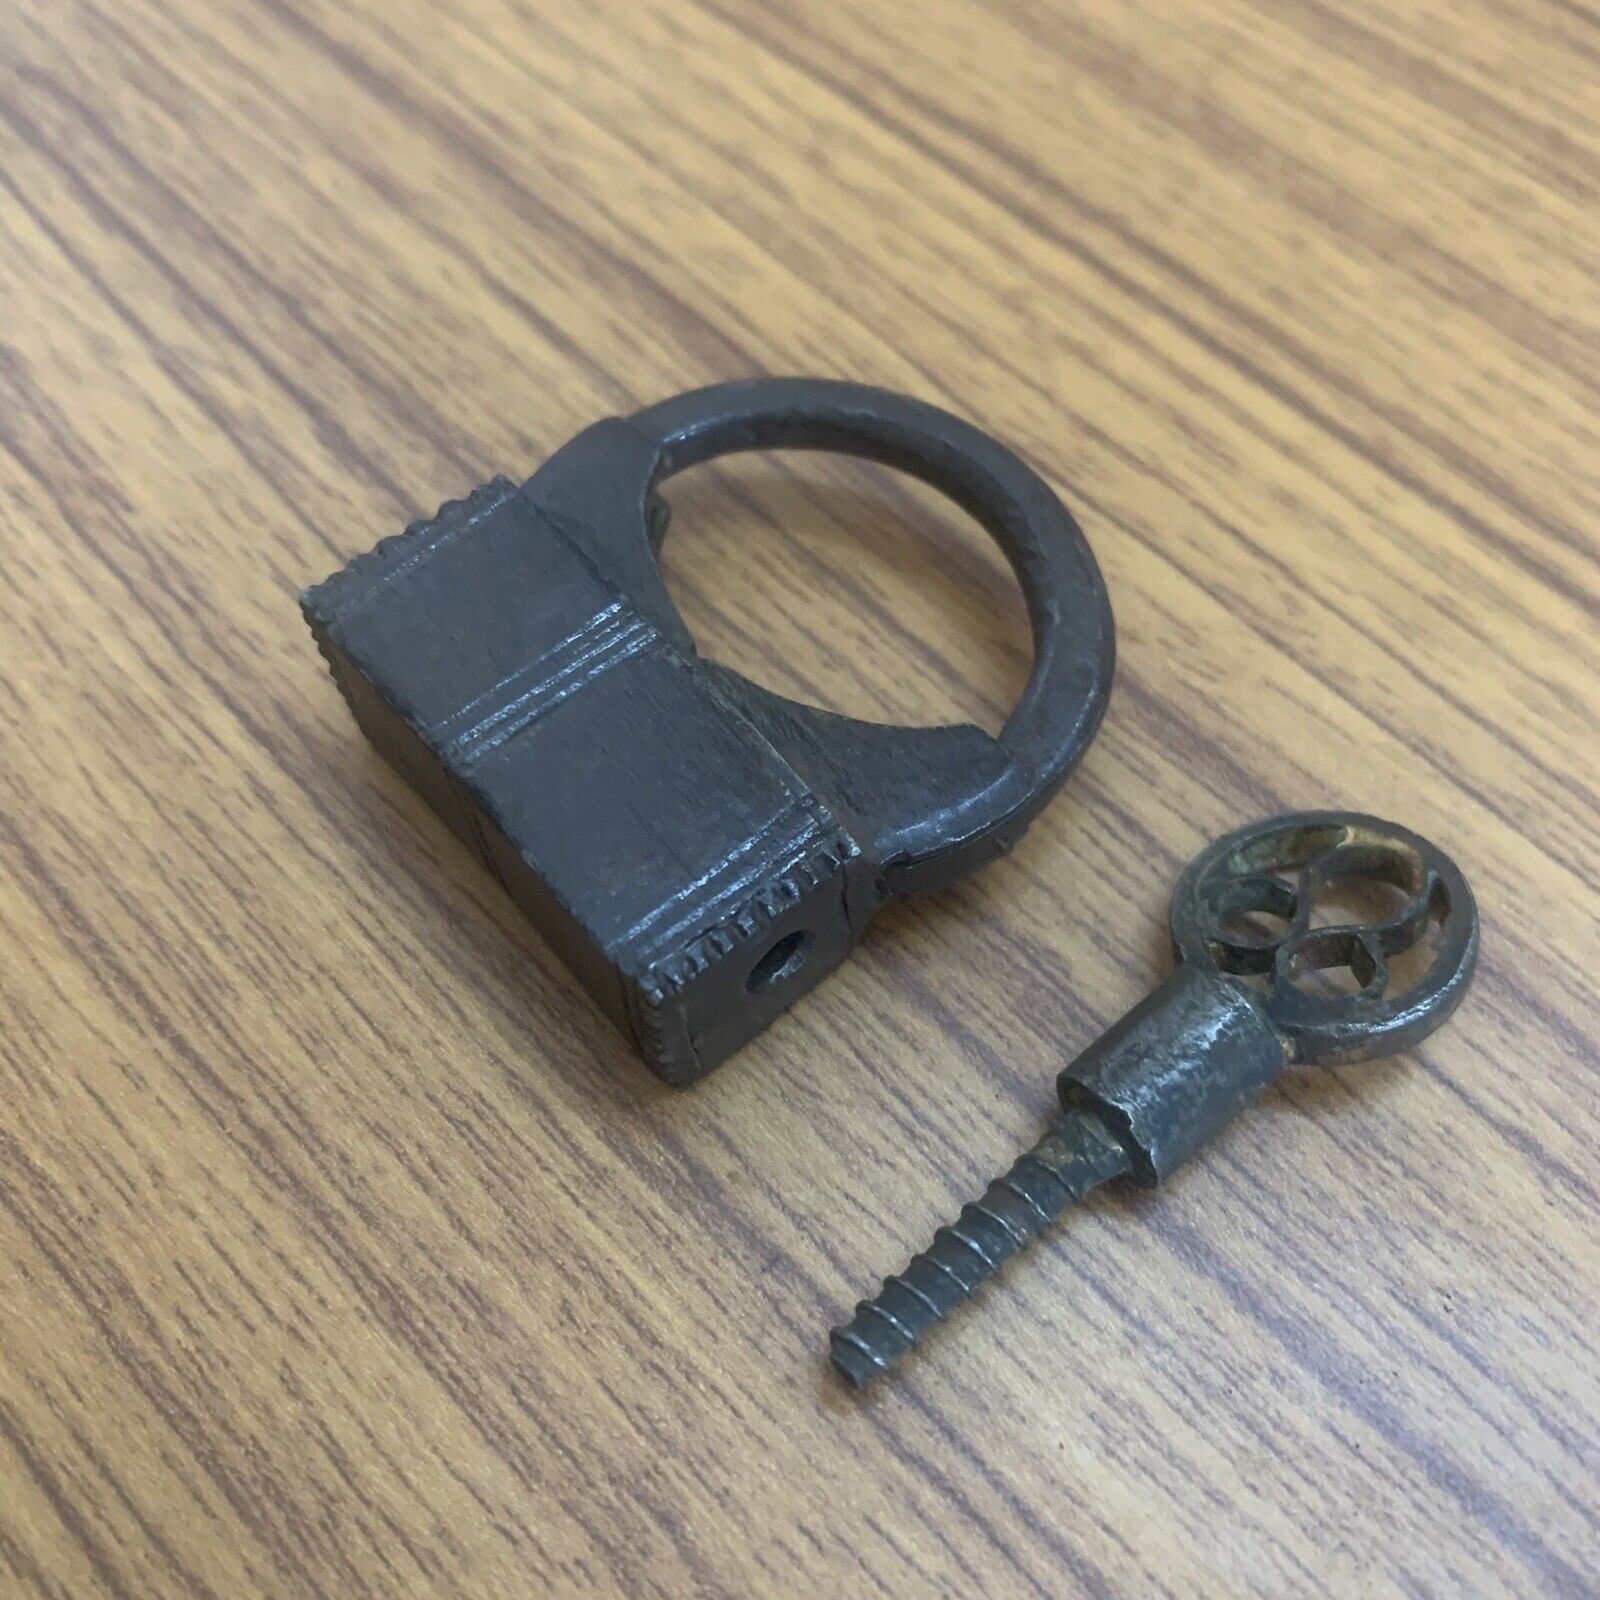 1850's Iron miniature padlock or lock with SCREW TYPE key, old or antique.